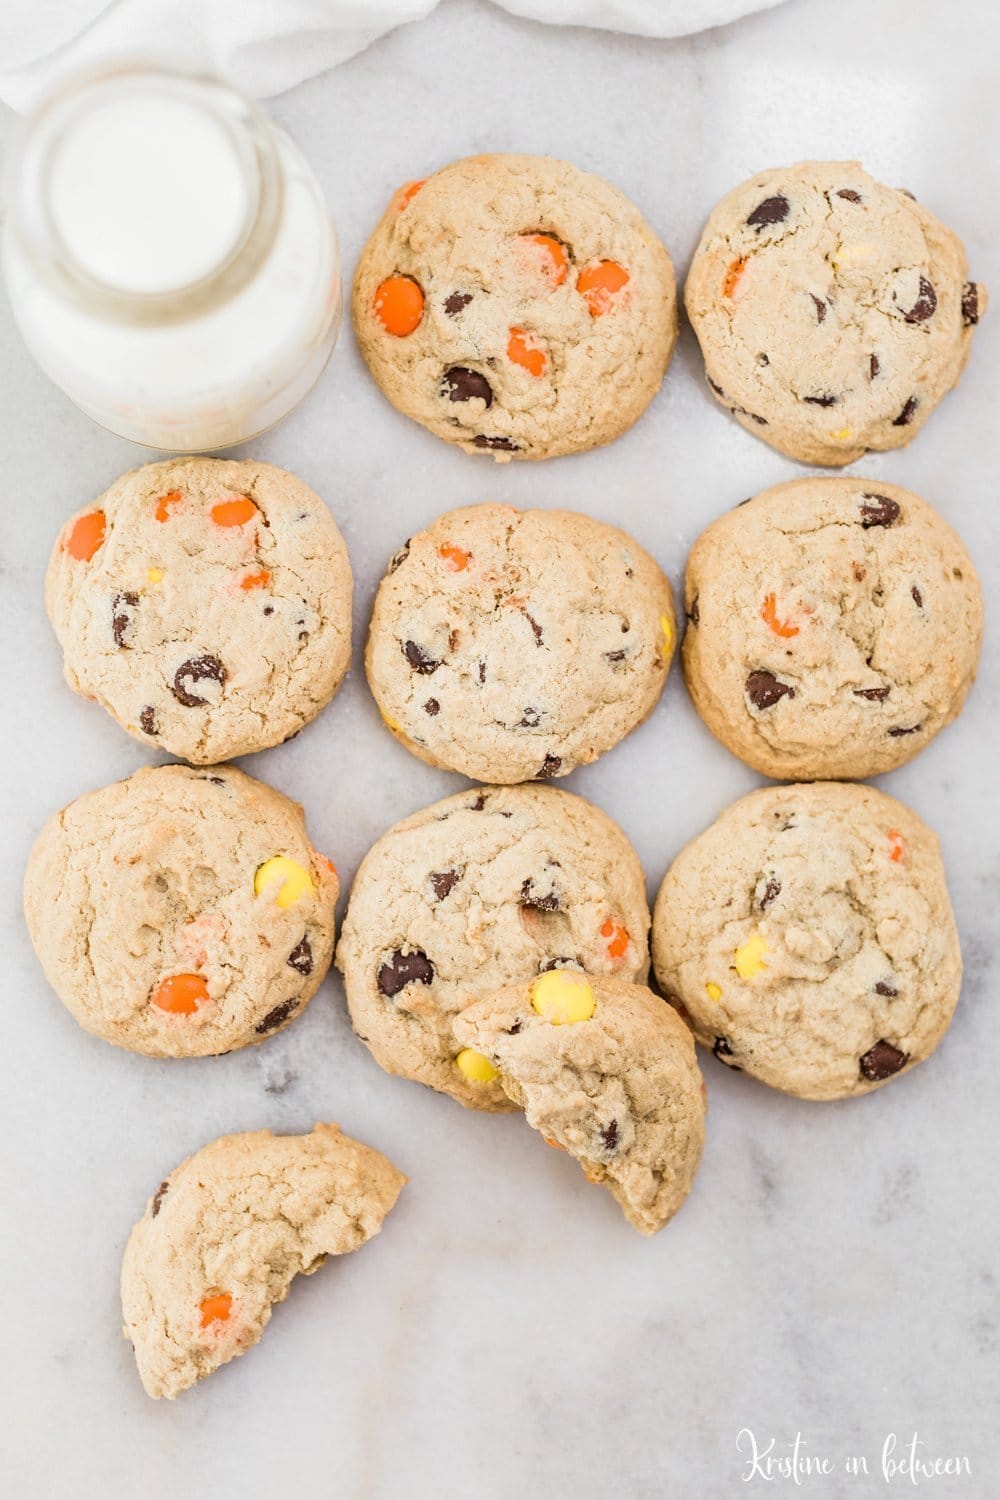 The best thick and chunky Reese's Pieces cookies that are loaded with chocolate chips and Reese's Pieces!